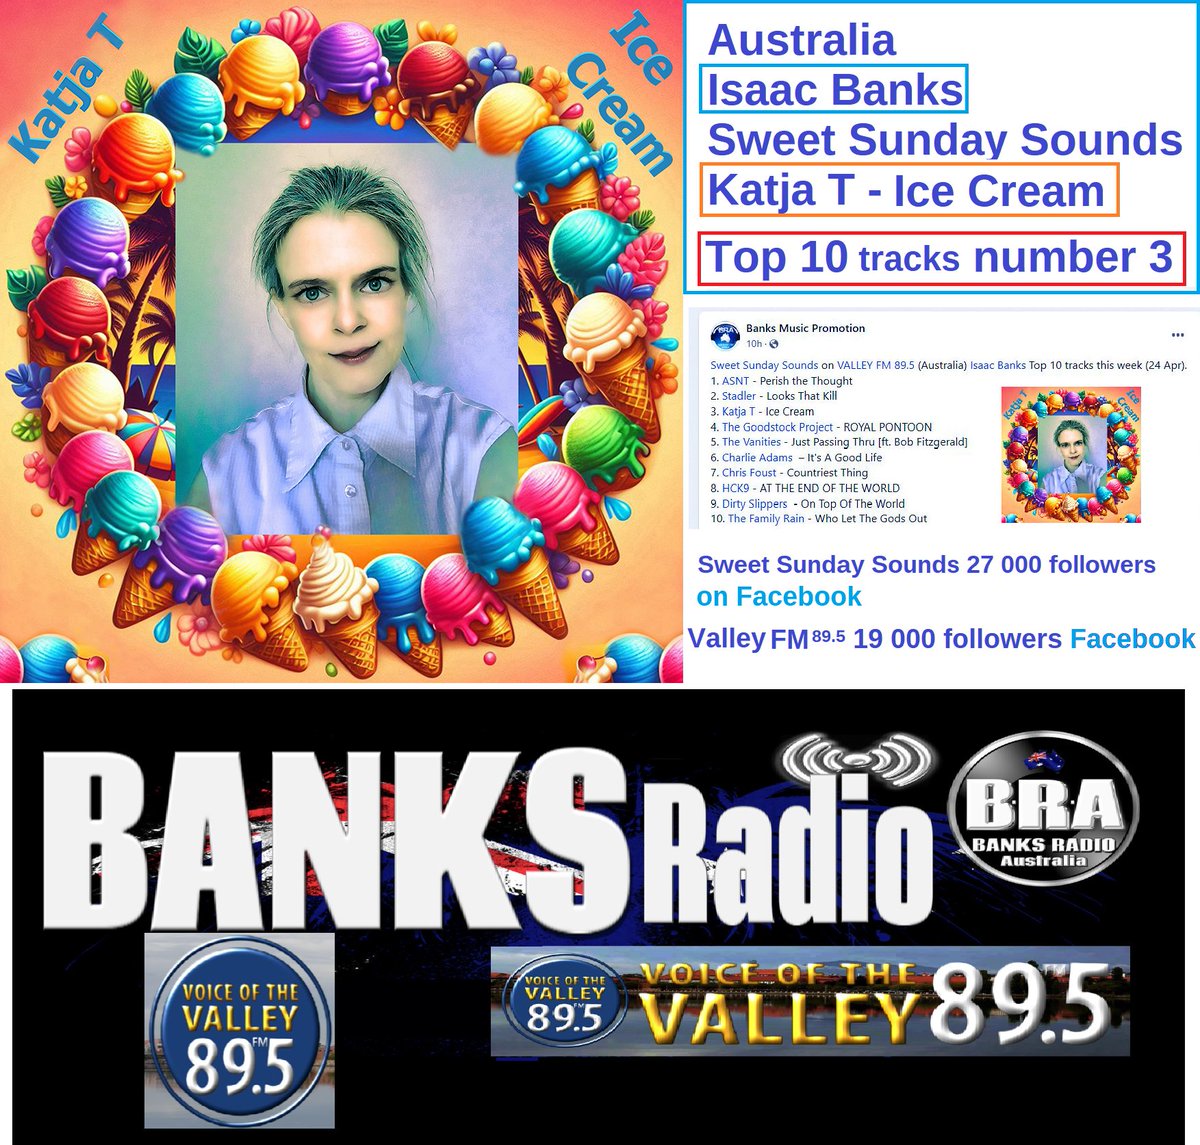 Unbelievable! 🤩🥉🎤In Australia, my song Katja T - Ice Cream is the 3rd most played in weekly chart on @ValleyFM, which has 19,000 followers on Facebook. Thank you very much, Isaac Banks, Sweet Sunday Sounds 27,000 followers and VALLEY FM 89.5 & @BanksRadioAU ! 💖